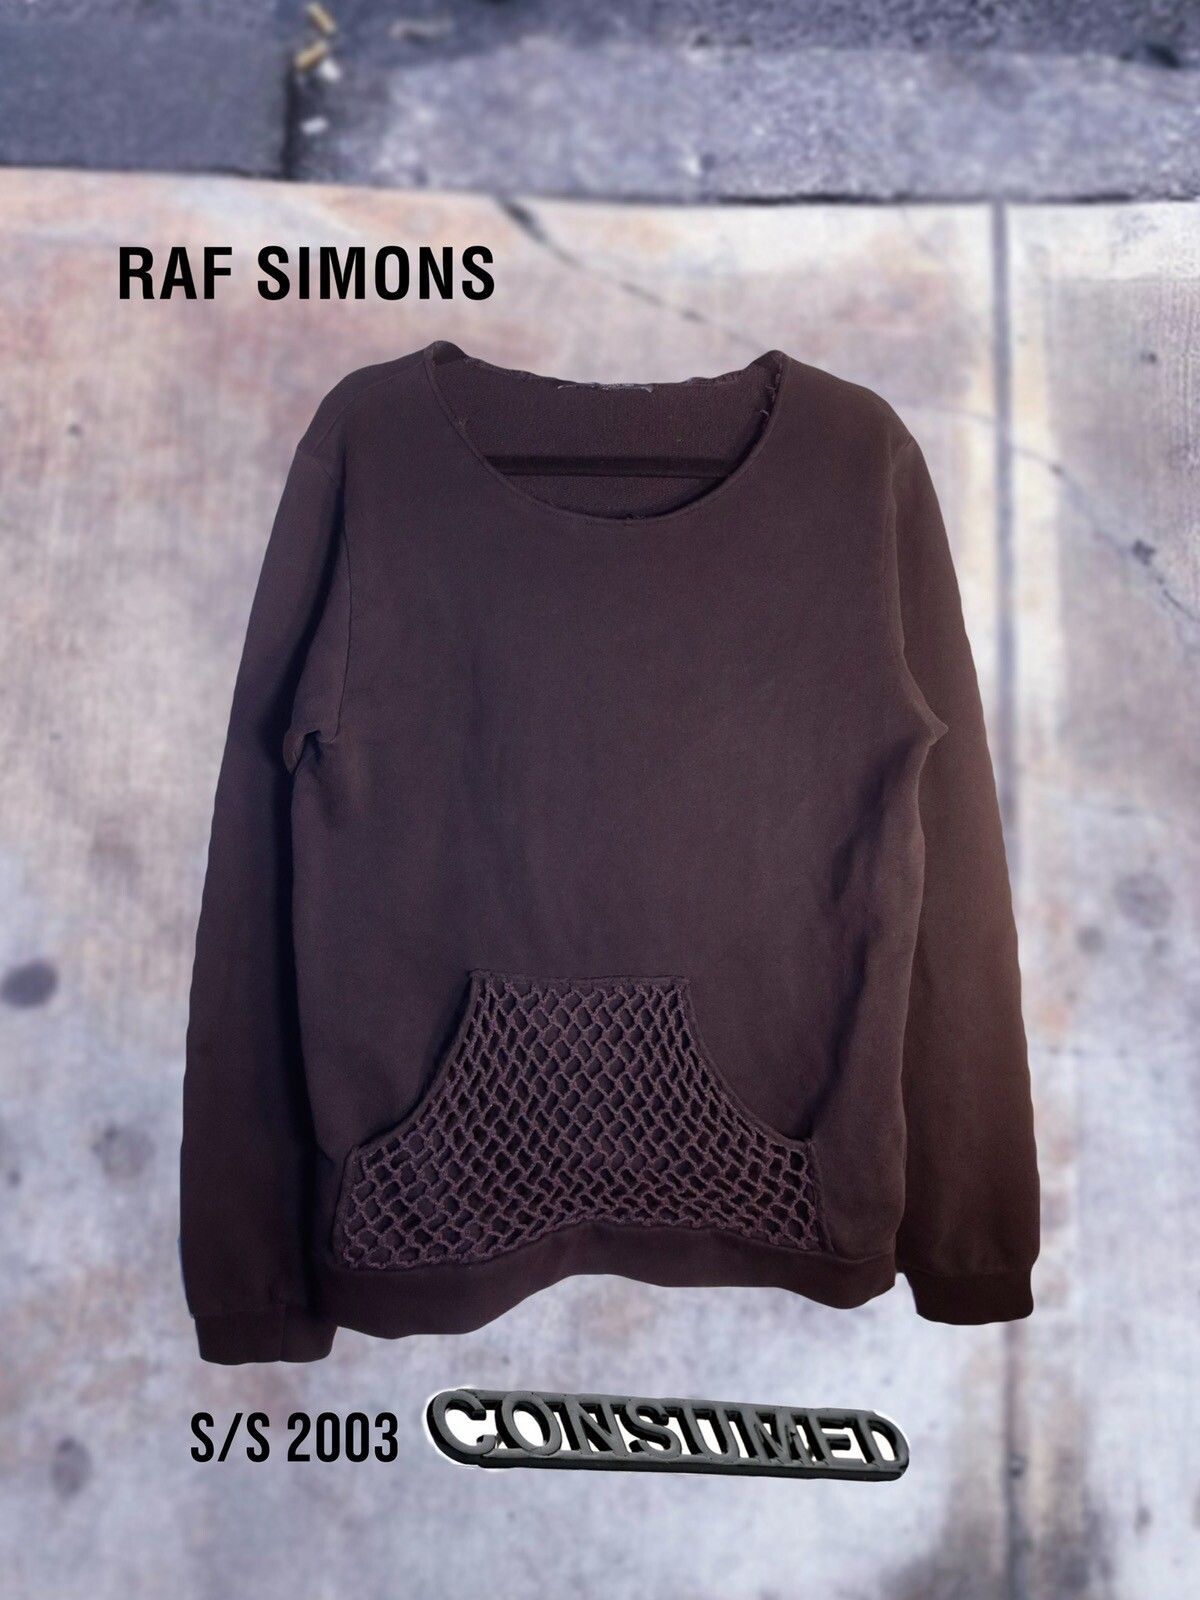 Pre-owned Raf Simons S/s 2003 “consumed” Fishnet Sweatshirt Size S-m In Black